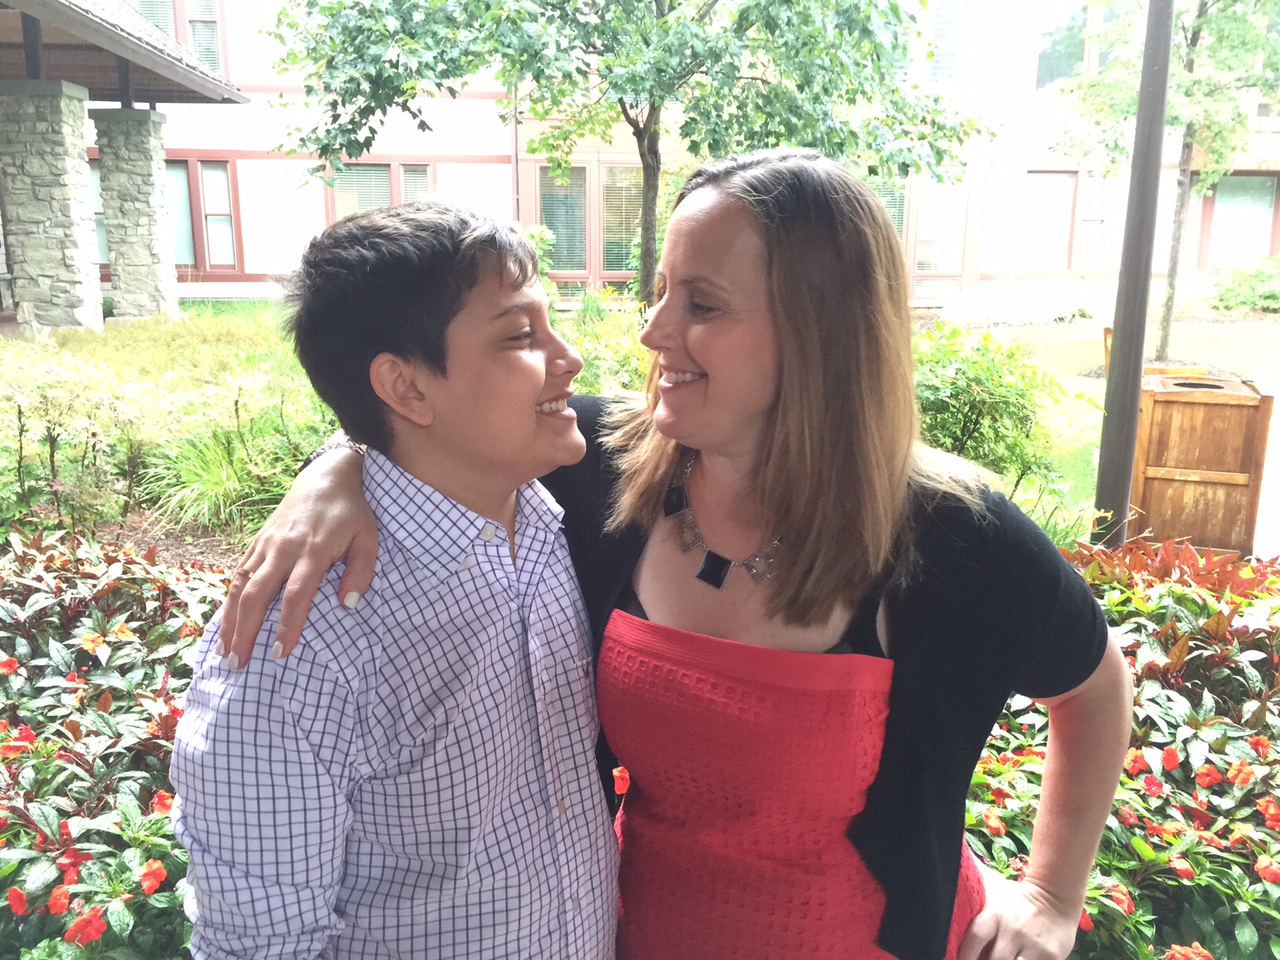 When Julie Sabag saw this picture of her and her son she said, "BFF's - Best Friends Forever!" (WTOP/Kristi King)